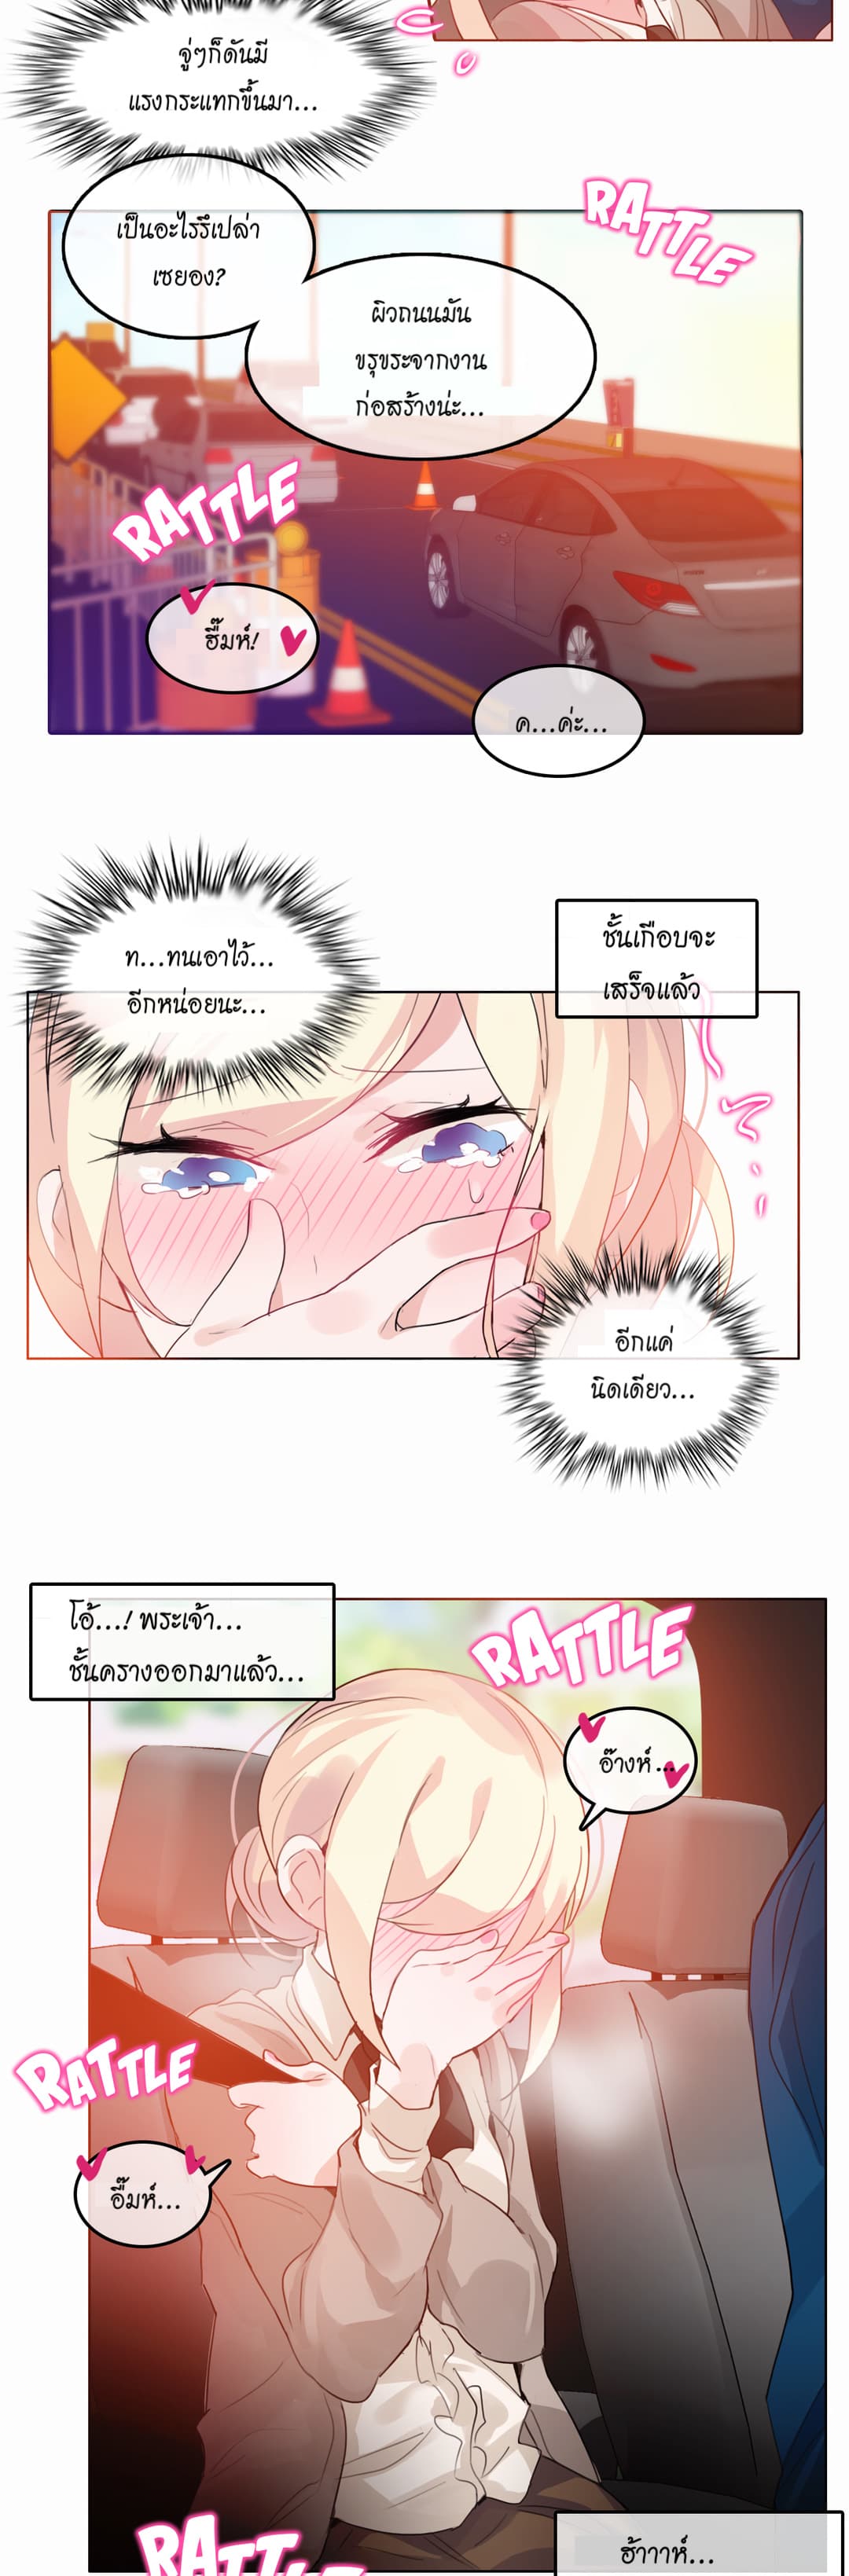 A Pervert’s Daily Life 19 (16)